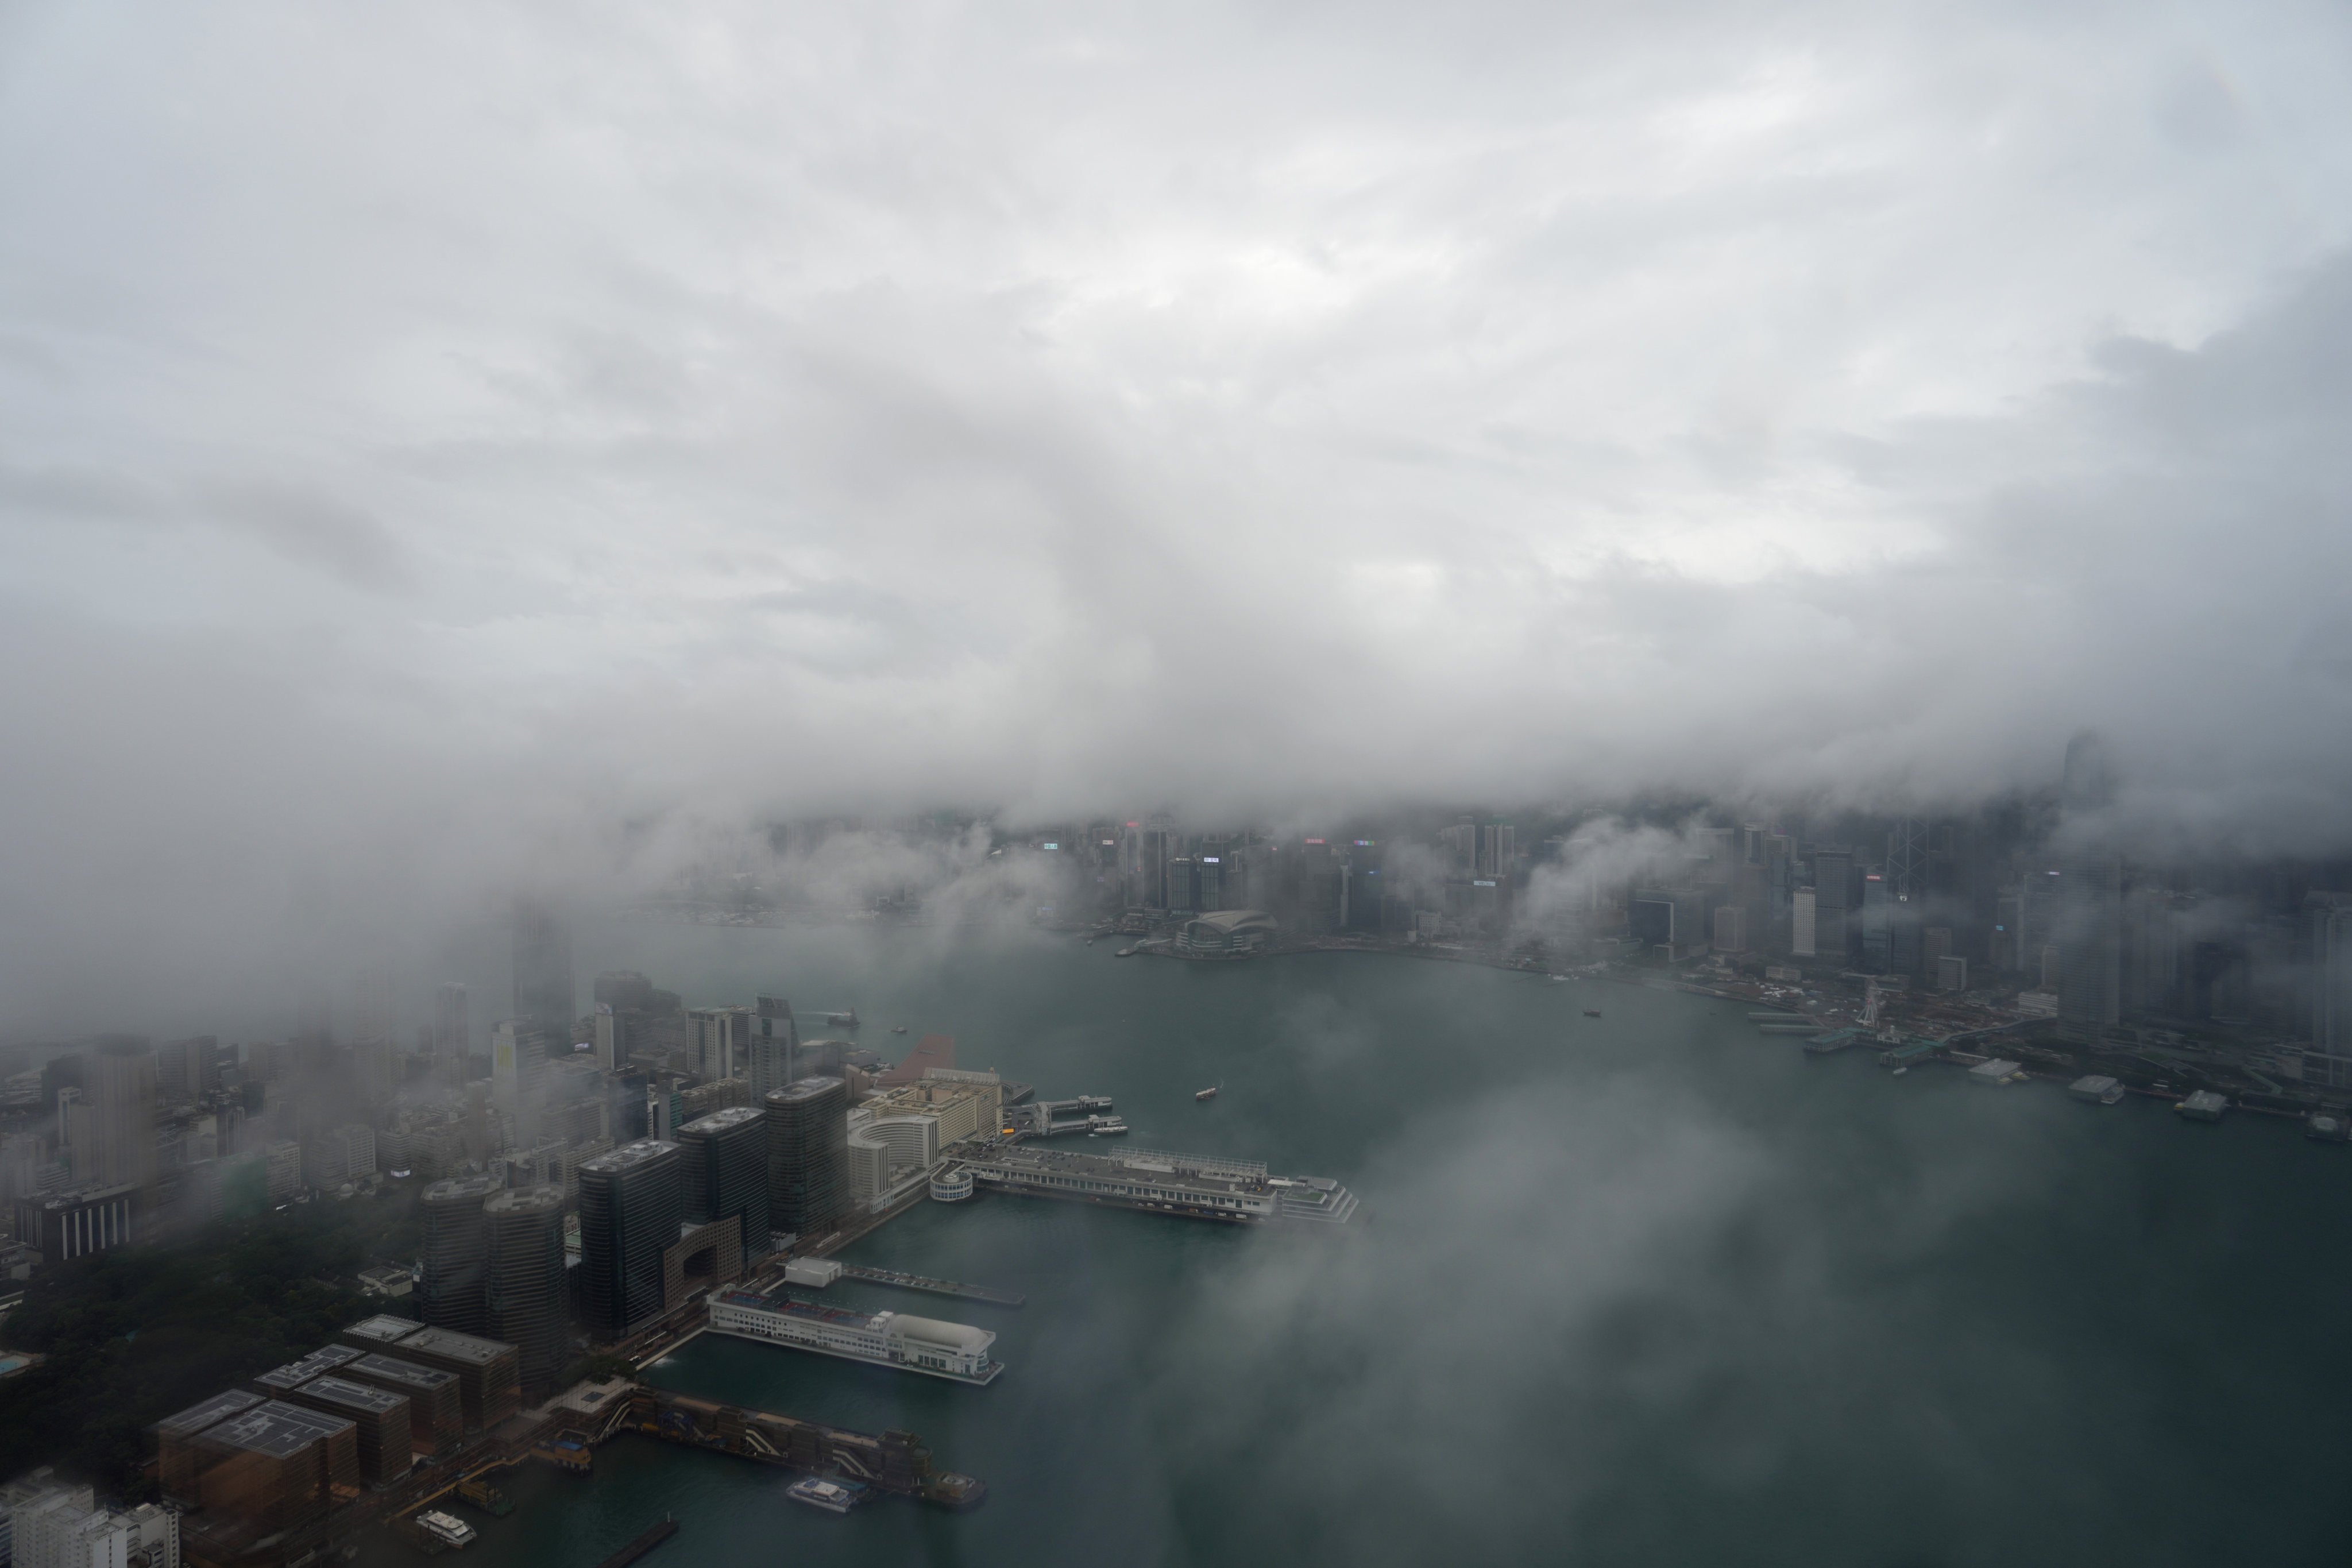 The Observatory earlier said that Hongkongers could expect showers over the weekend due to the influence of an active southwest monsoon. Photo: Sam Tsang